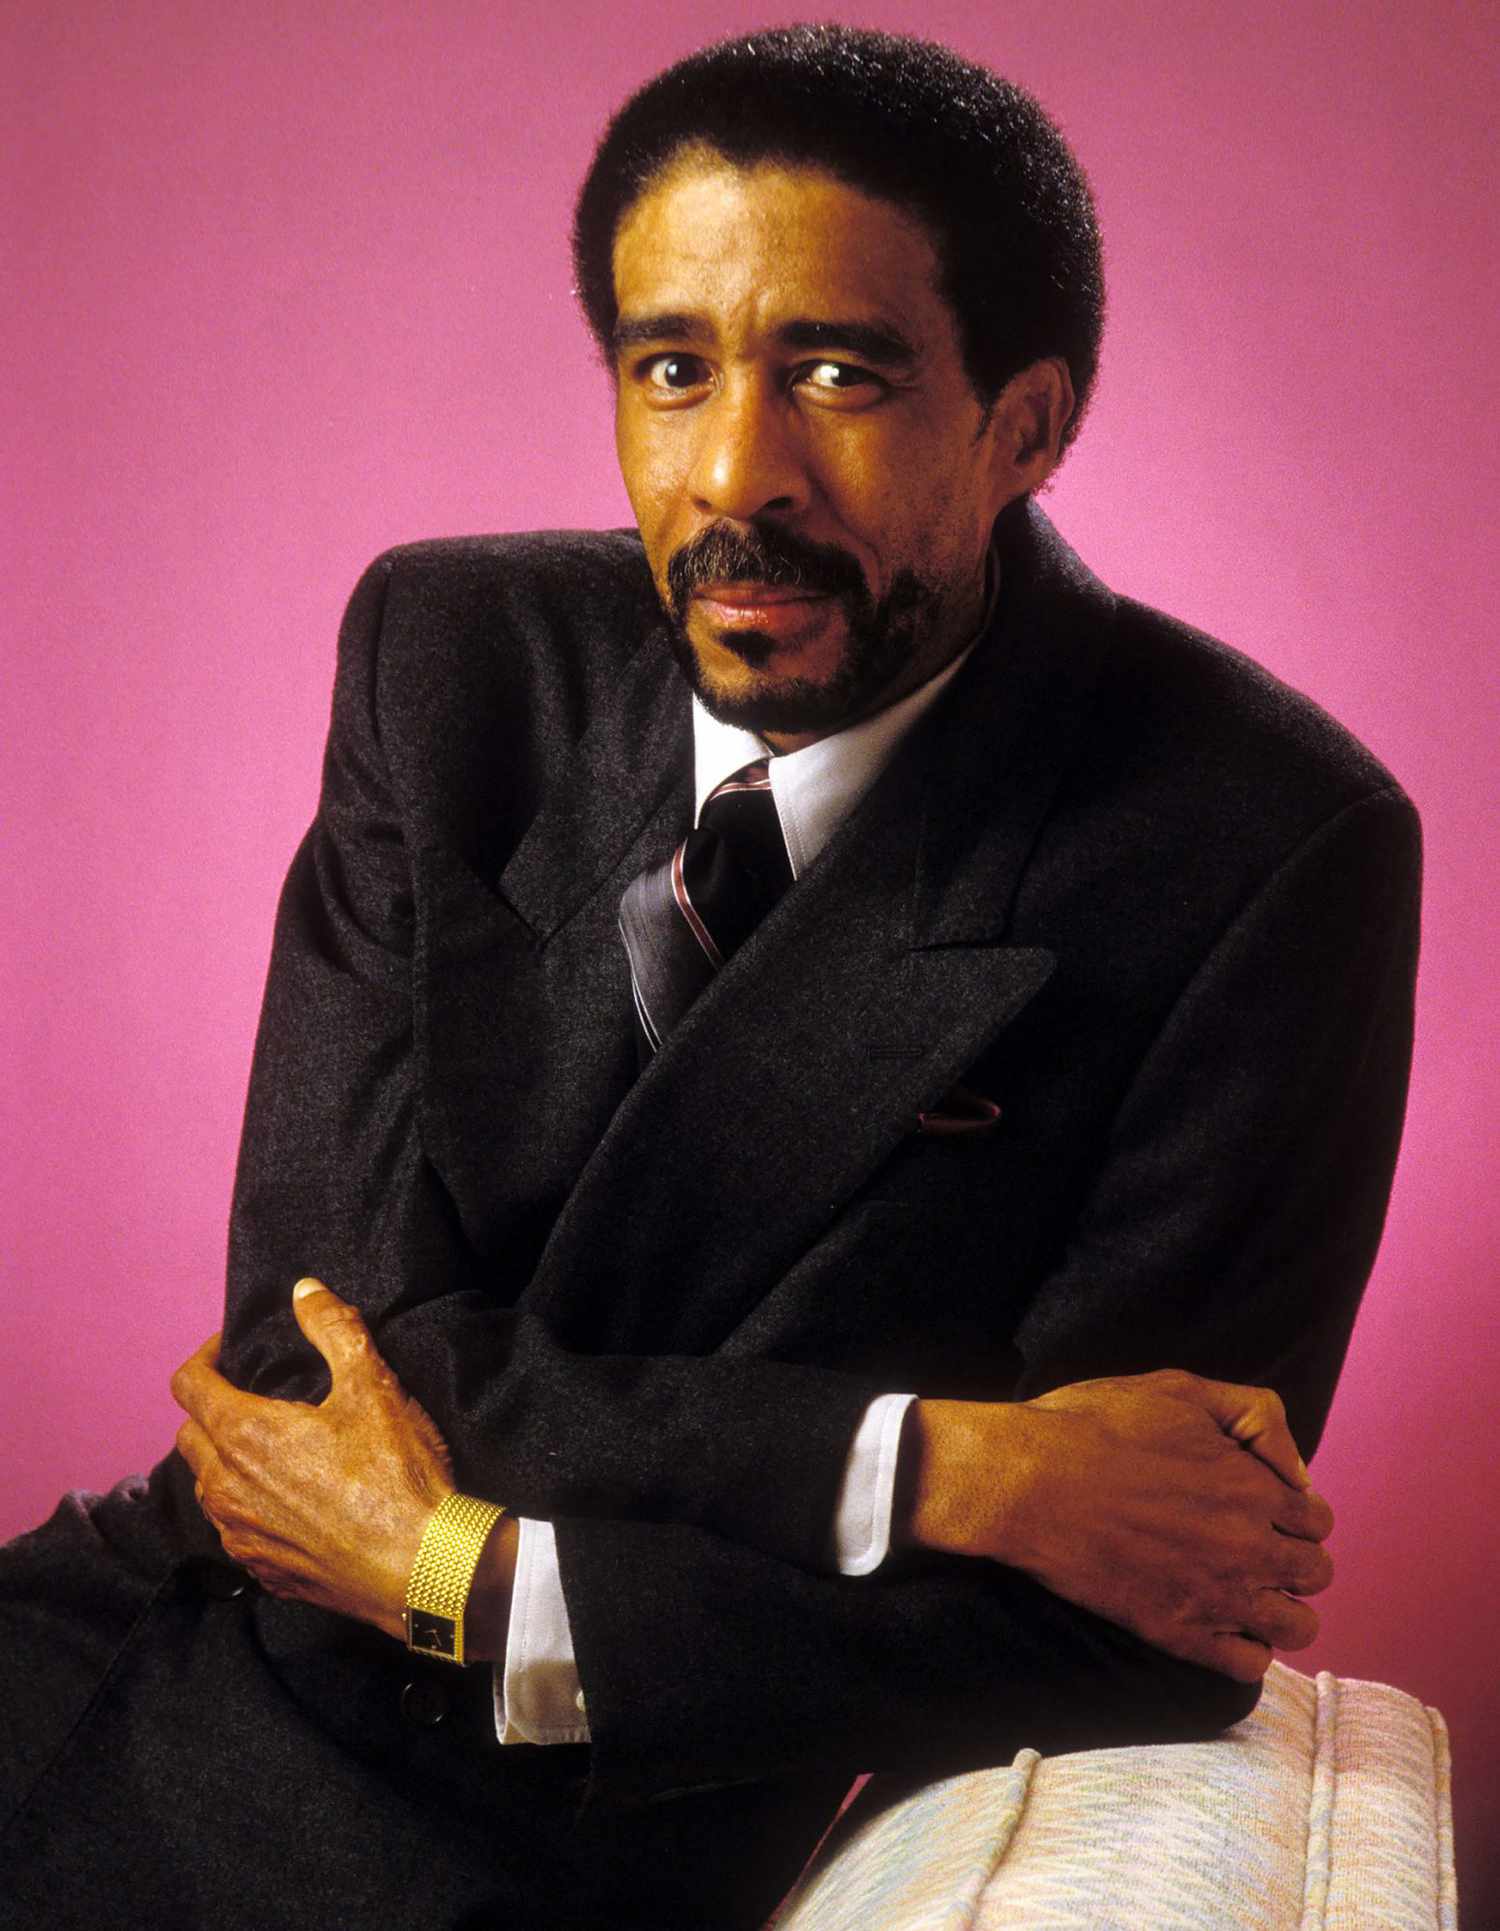 Photo Session with Comedian Richard Pryor